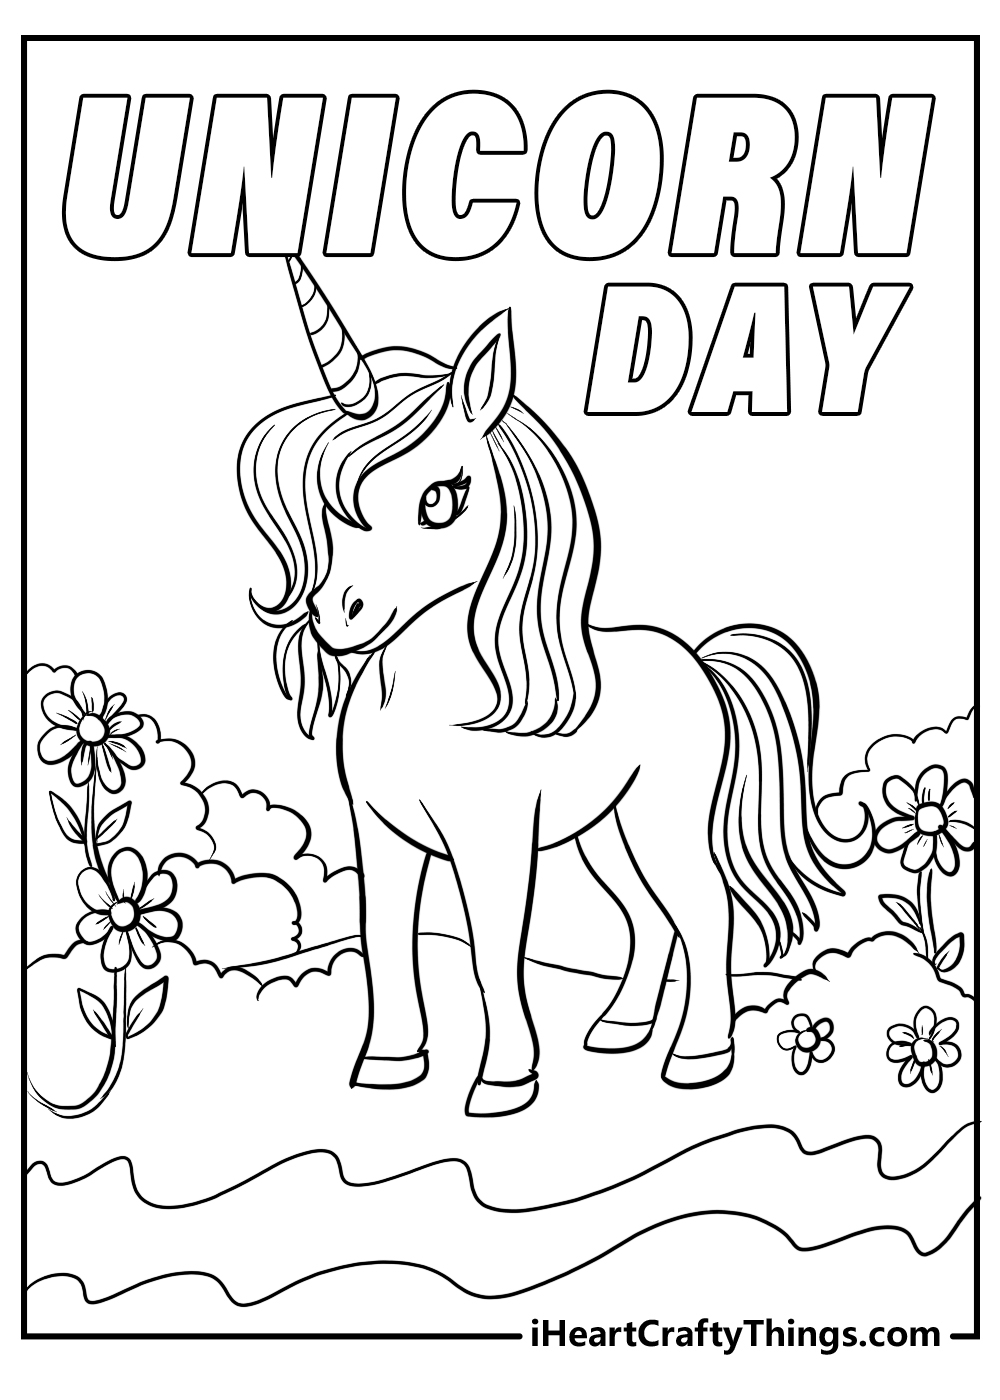 unicorn day coloring pages